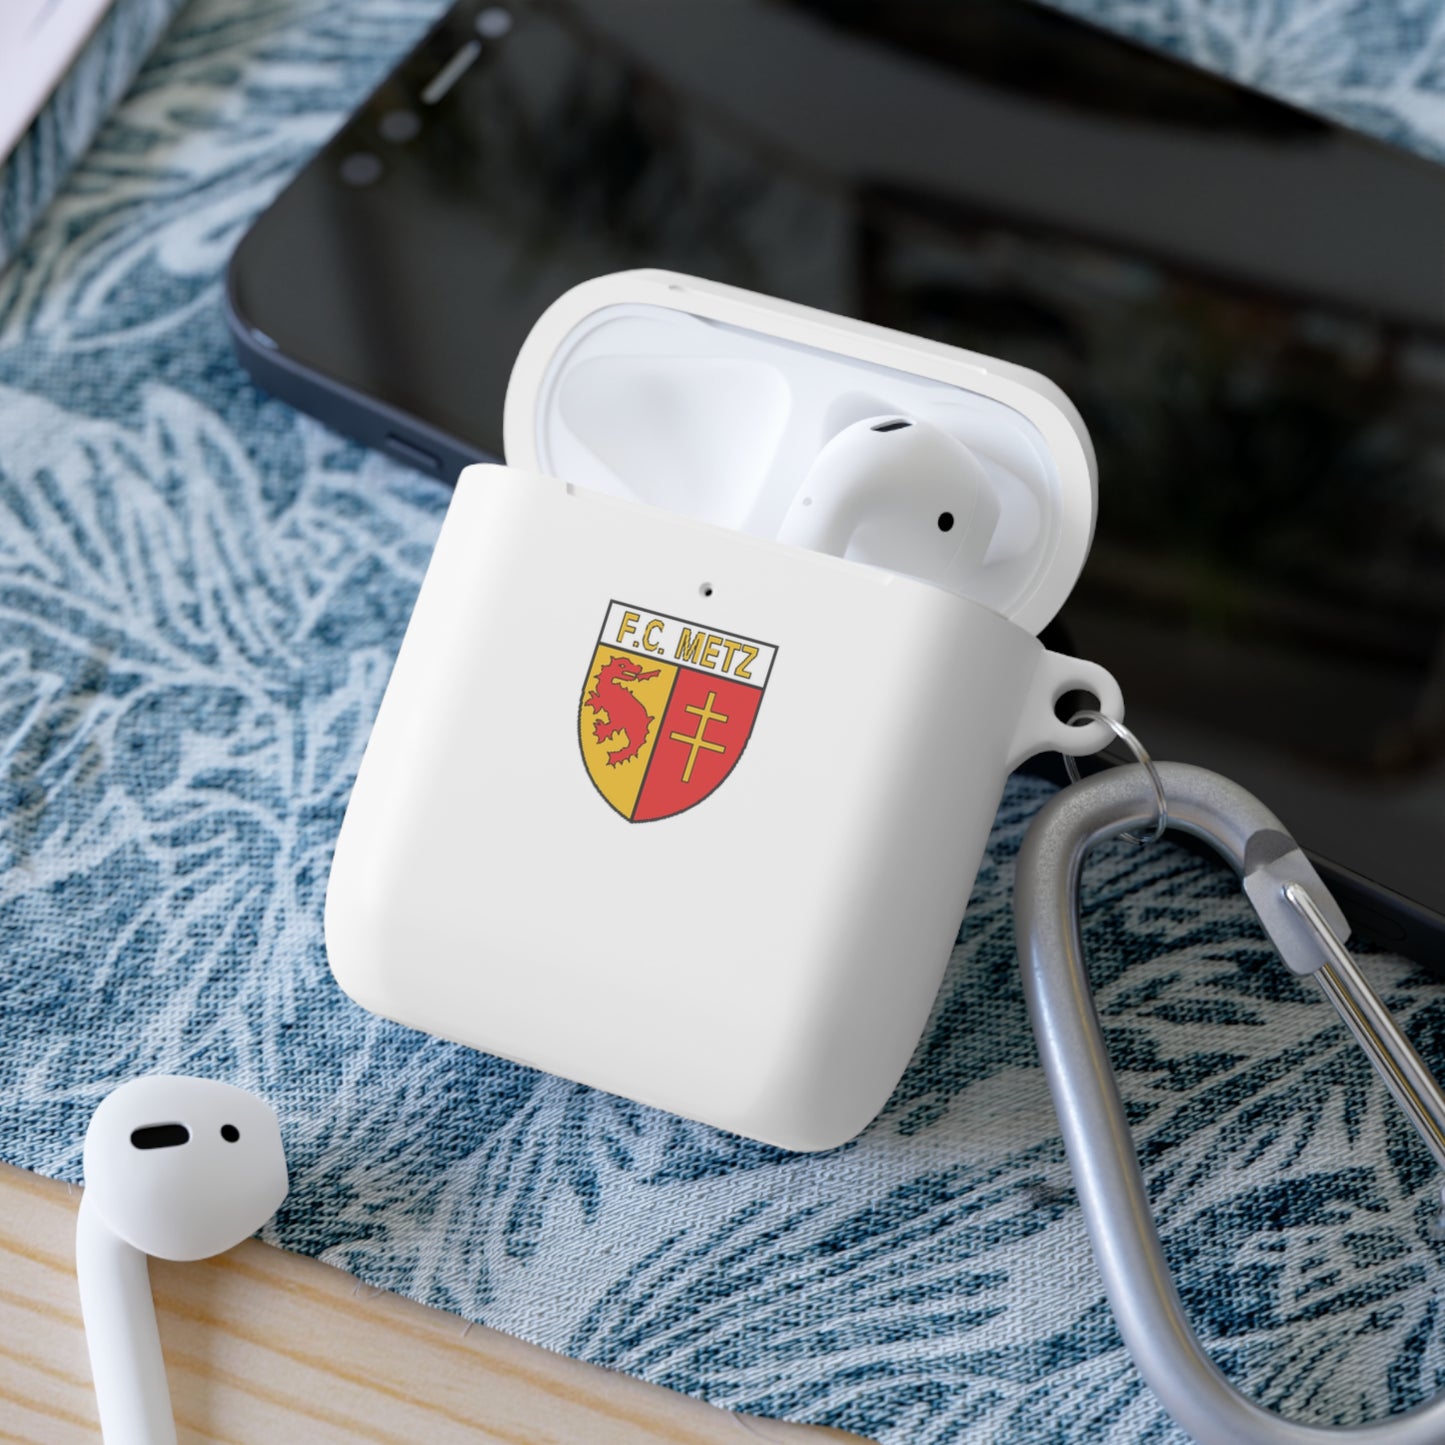 FC Metz (old logo) AirPods and AirPods Pro Case Cover